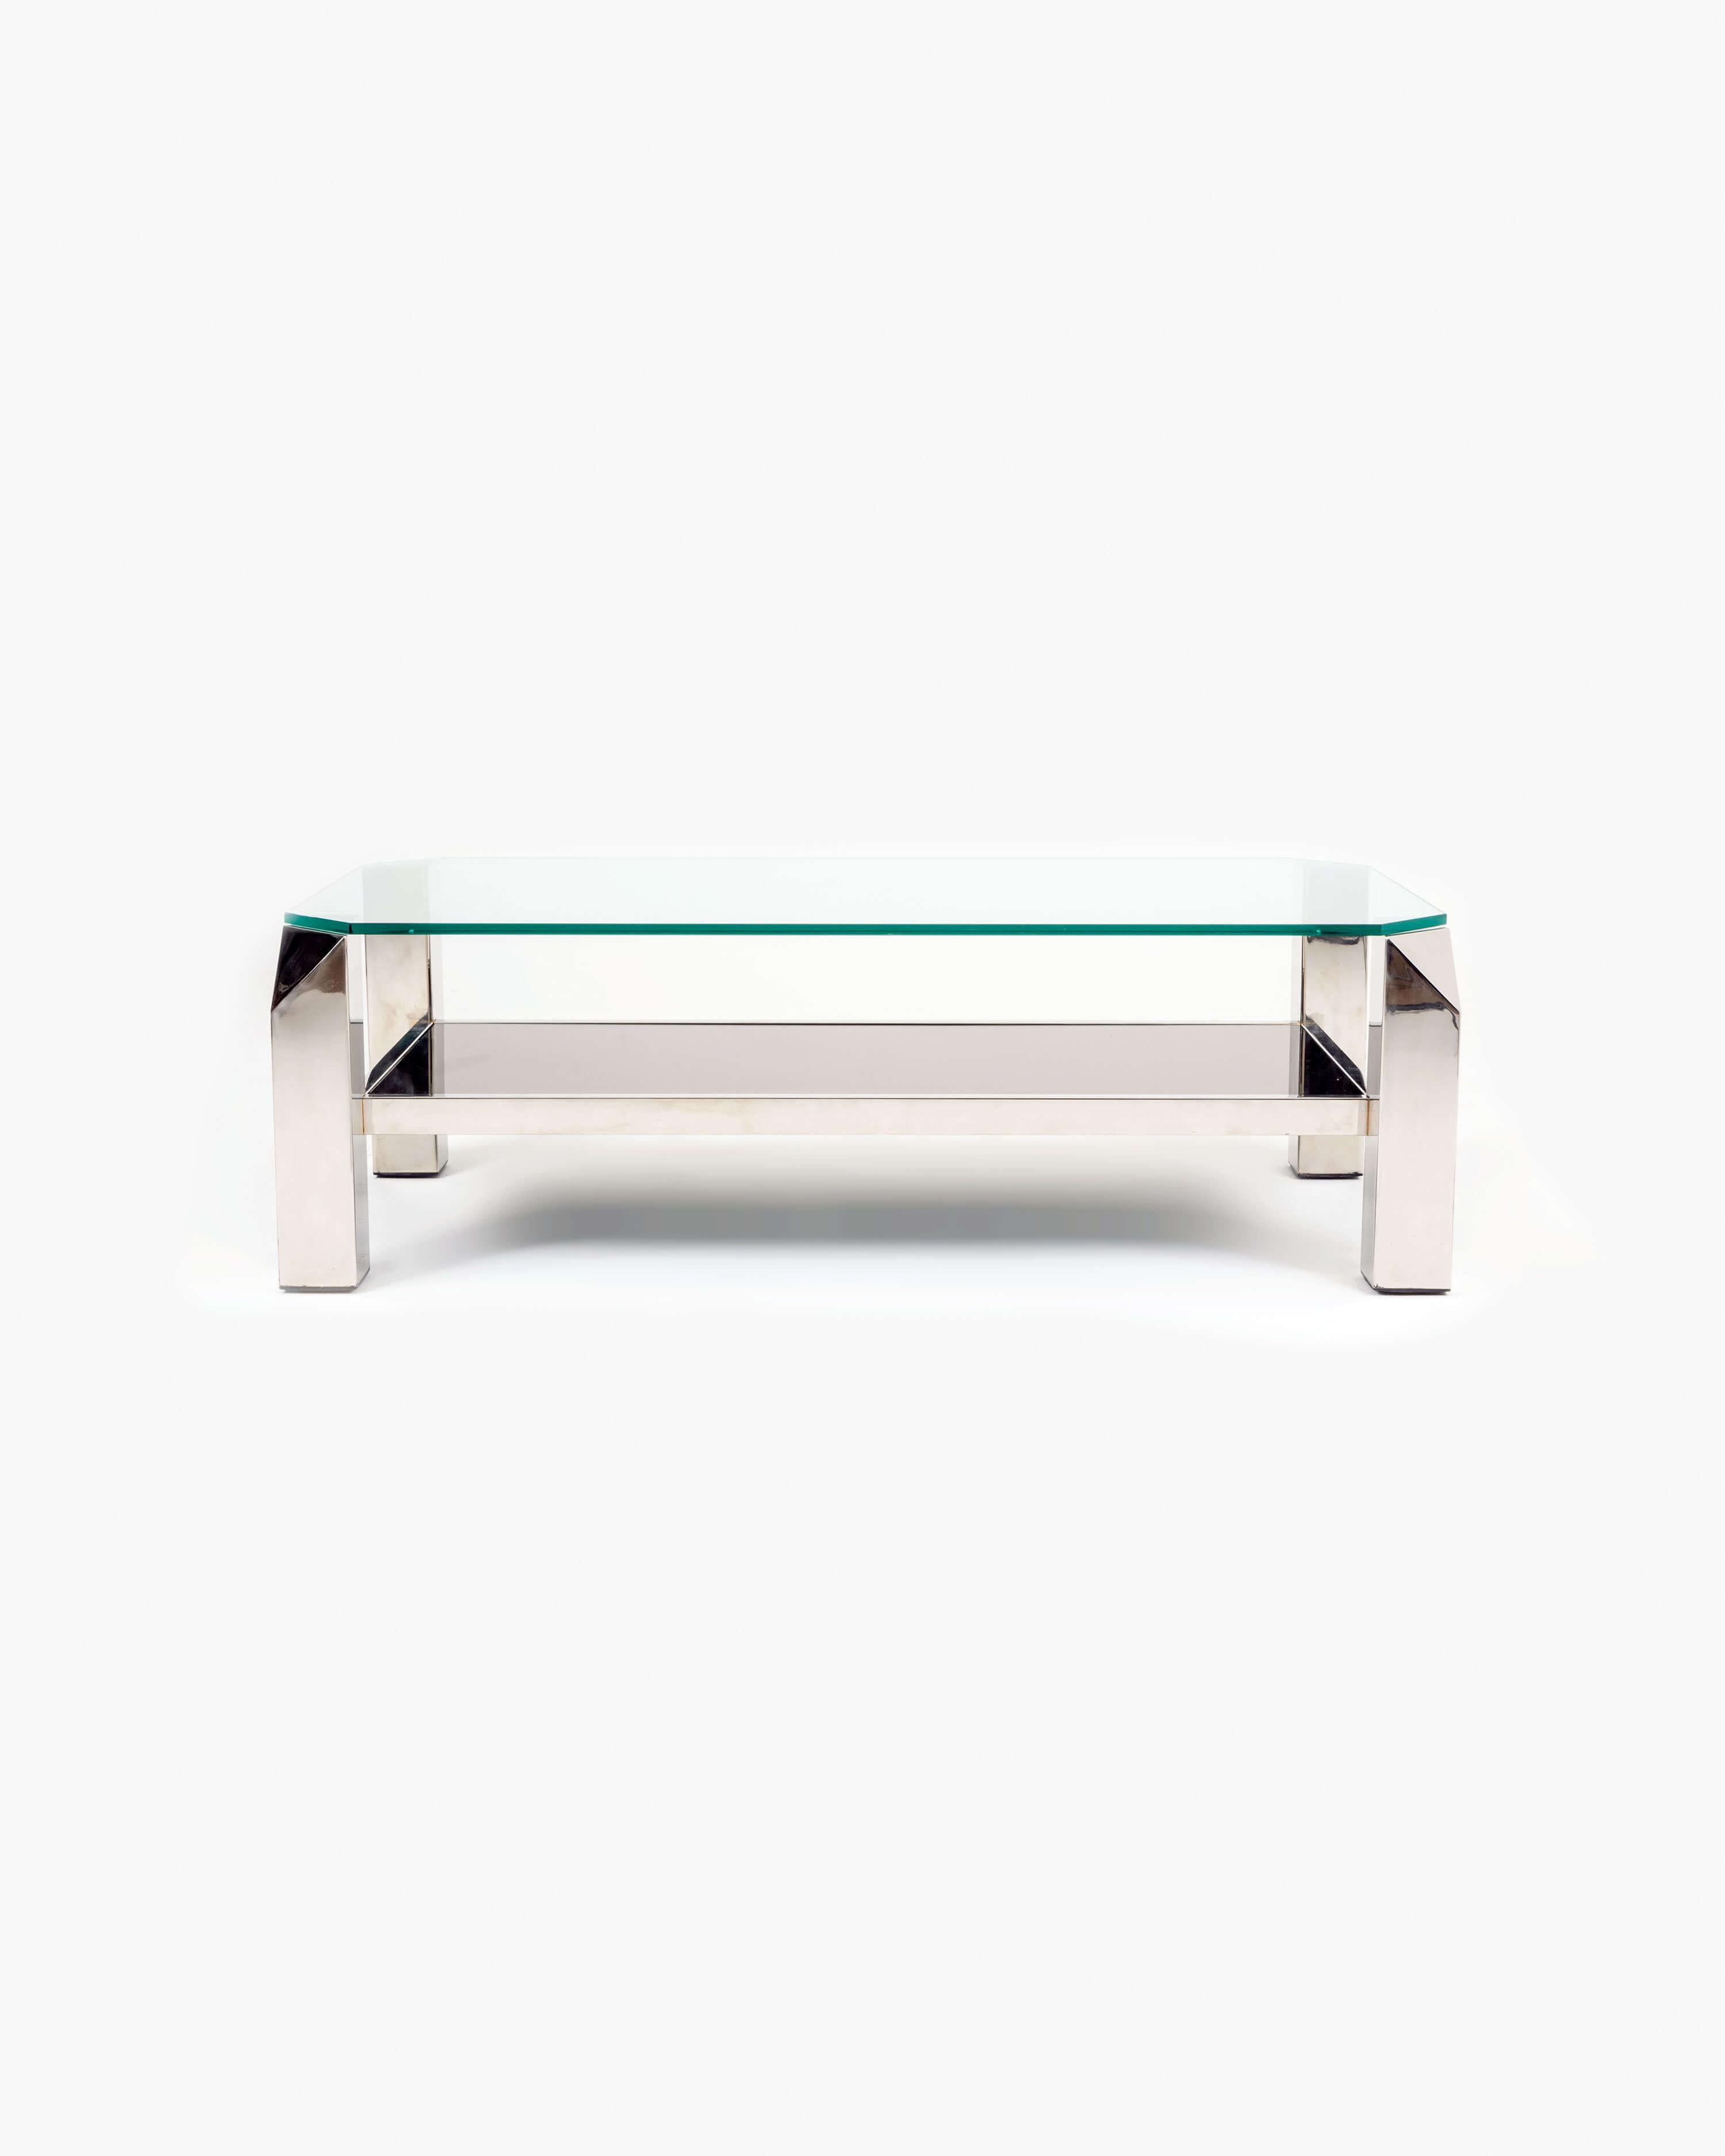 Introducing the exquisite Belgo Chrom Coffee Table: a stunning piece crafted with precision and style. This geometric two-tiered coffee table, originating from Belgium in the mid-20th century, exudes timeless elegance. Meticulously refinished to its